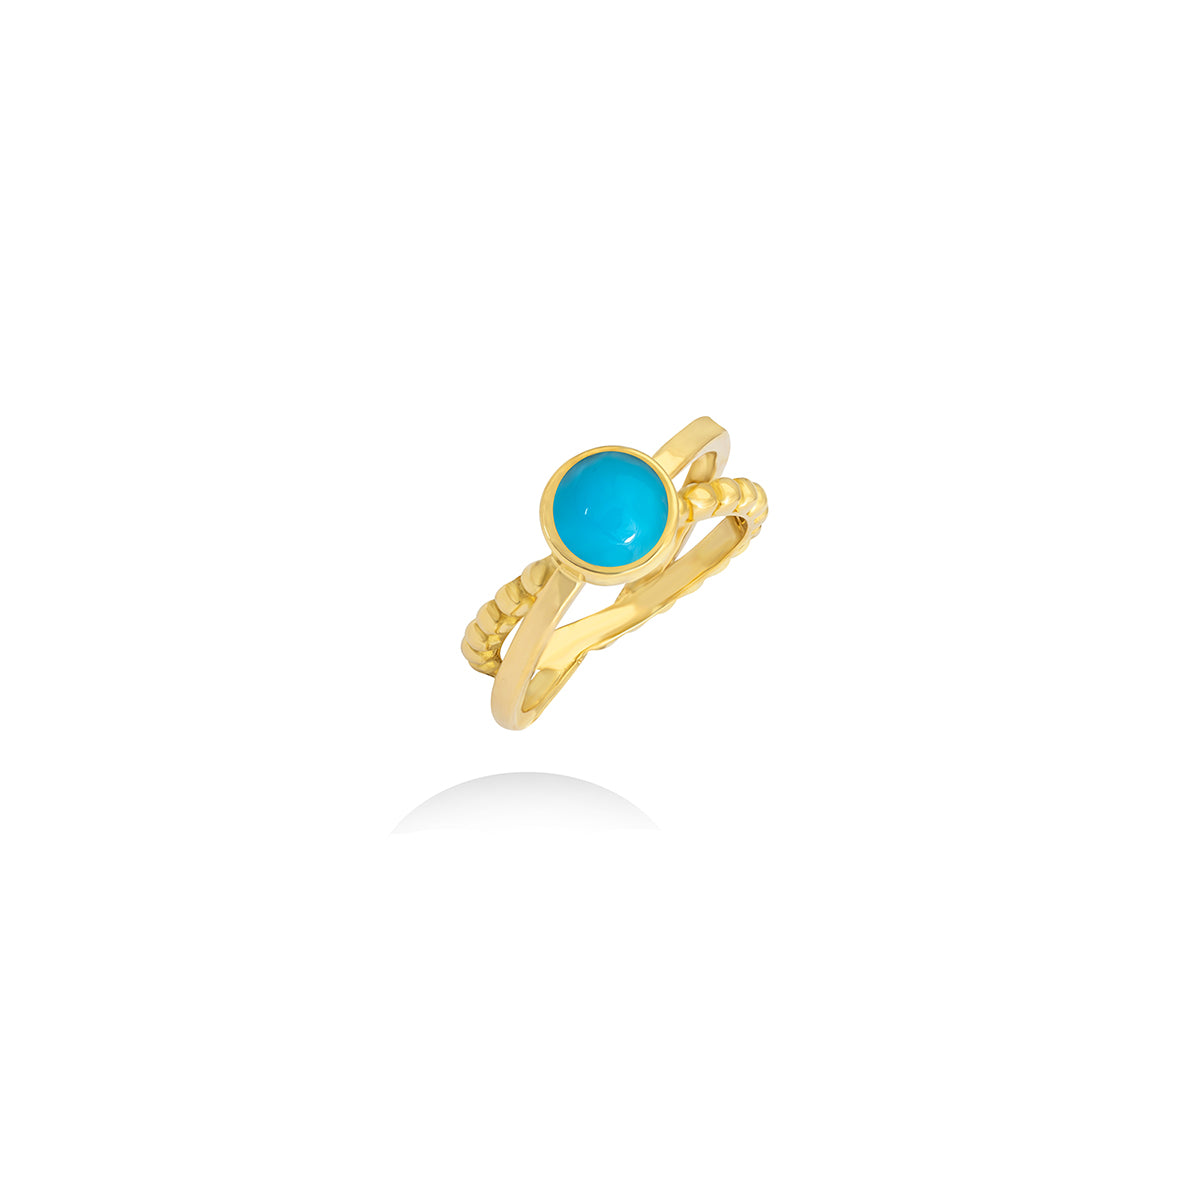 Turquoise Gemstone Criss Cross Ring in 18k Yellow gold